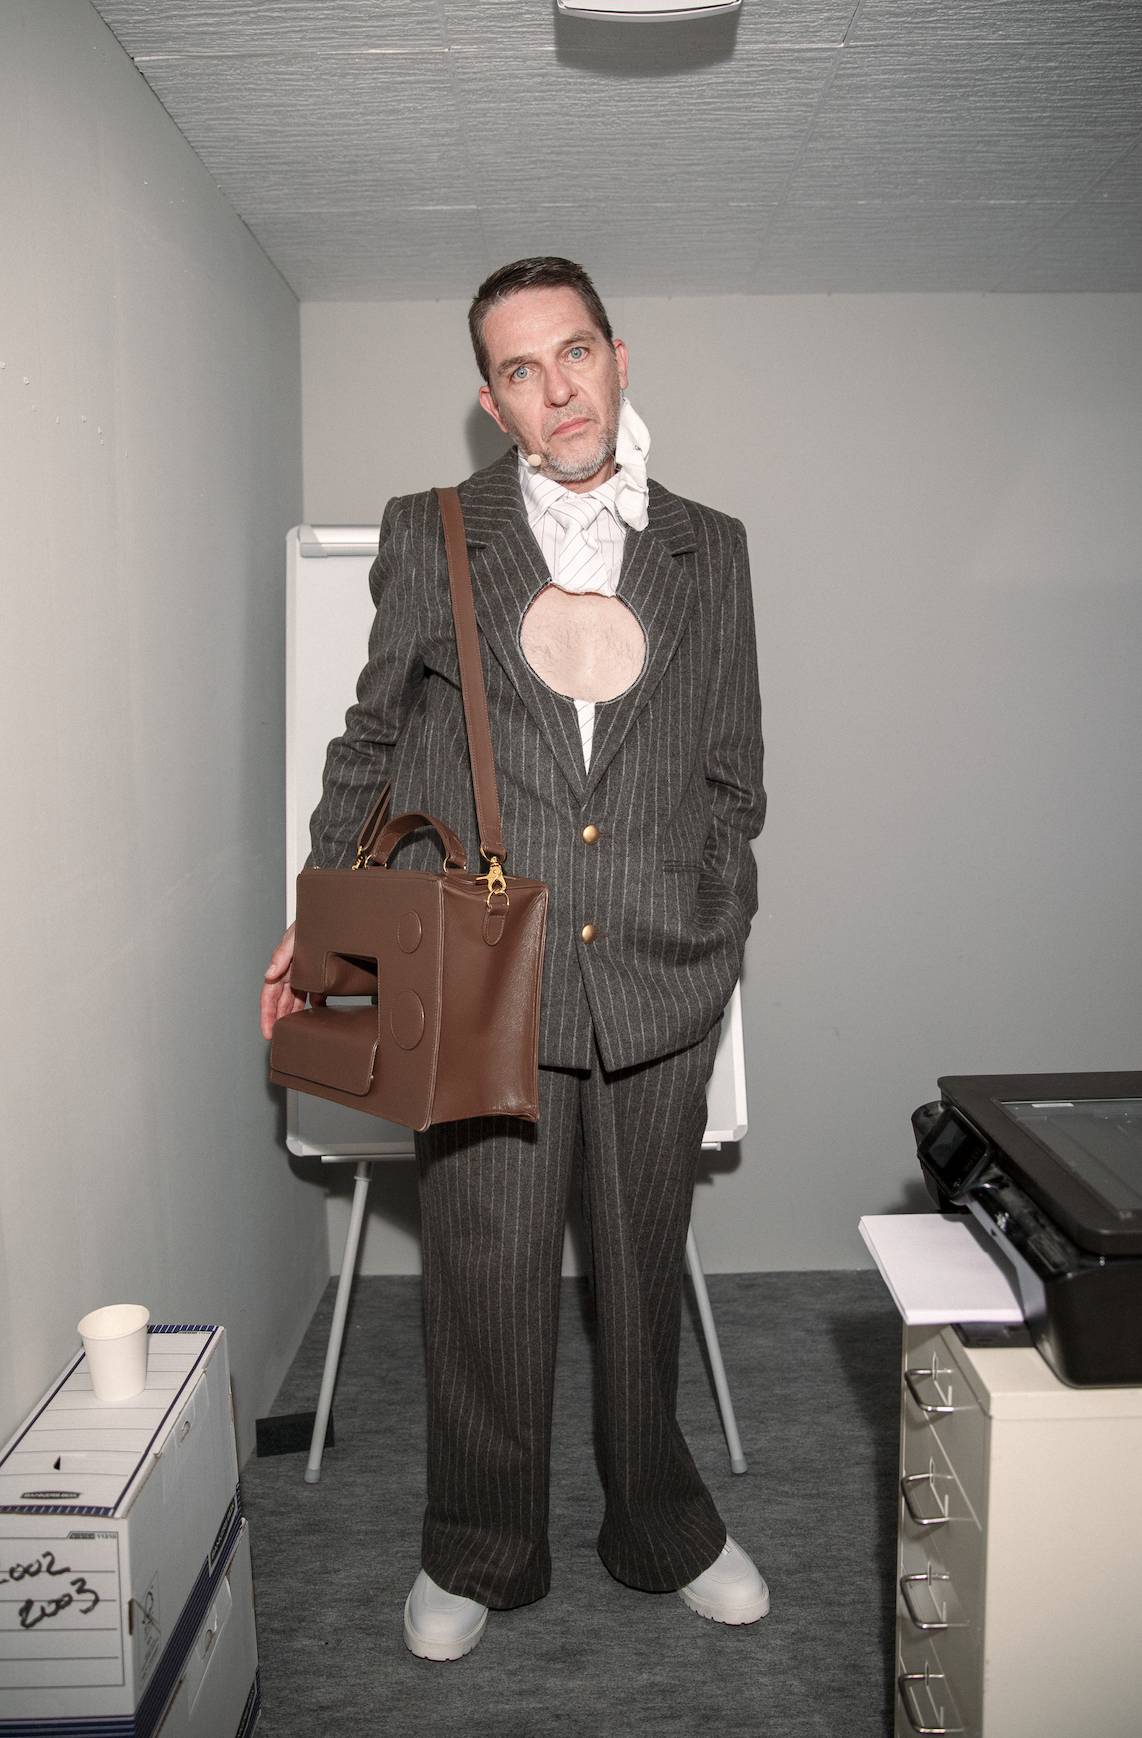 COLM DILLANE BRINGS COMEDY TO PARIS FASHION WEEK FOR HIS NEW